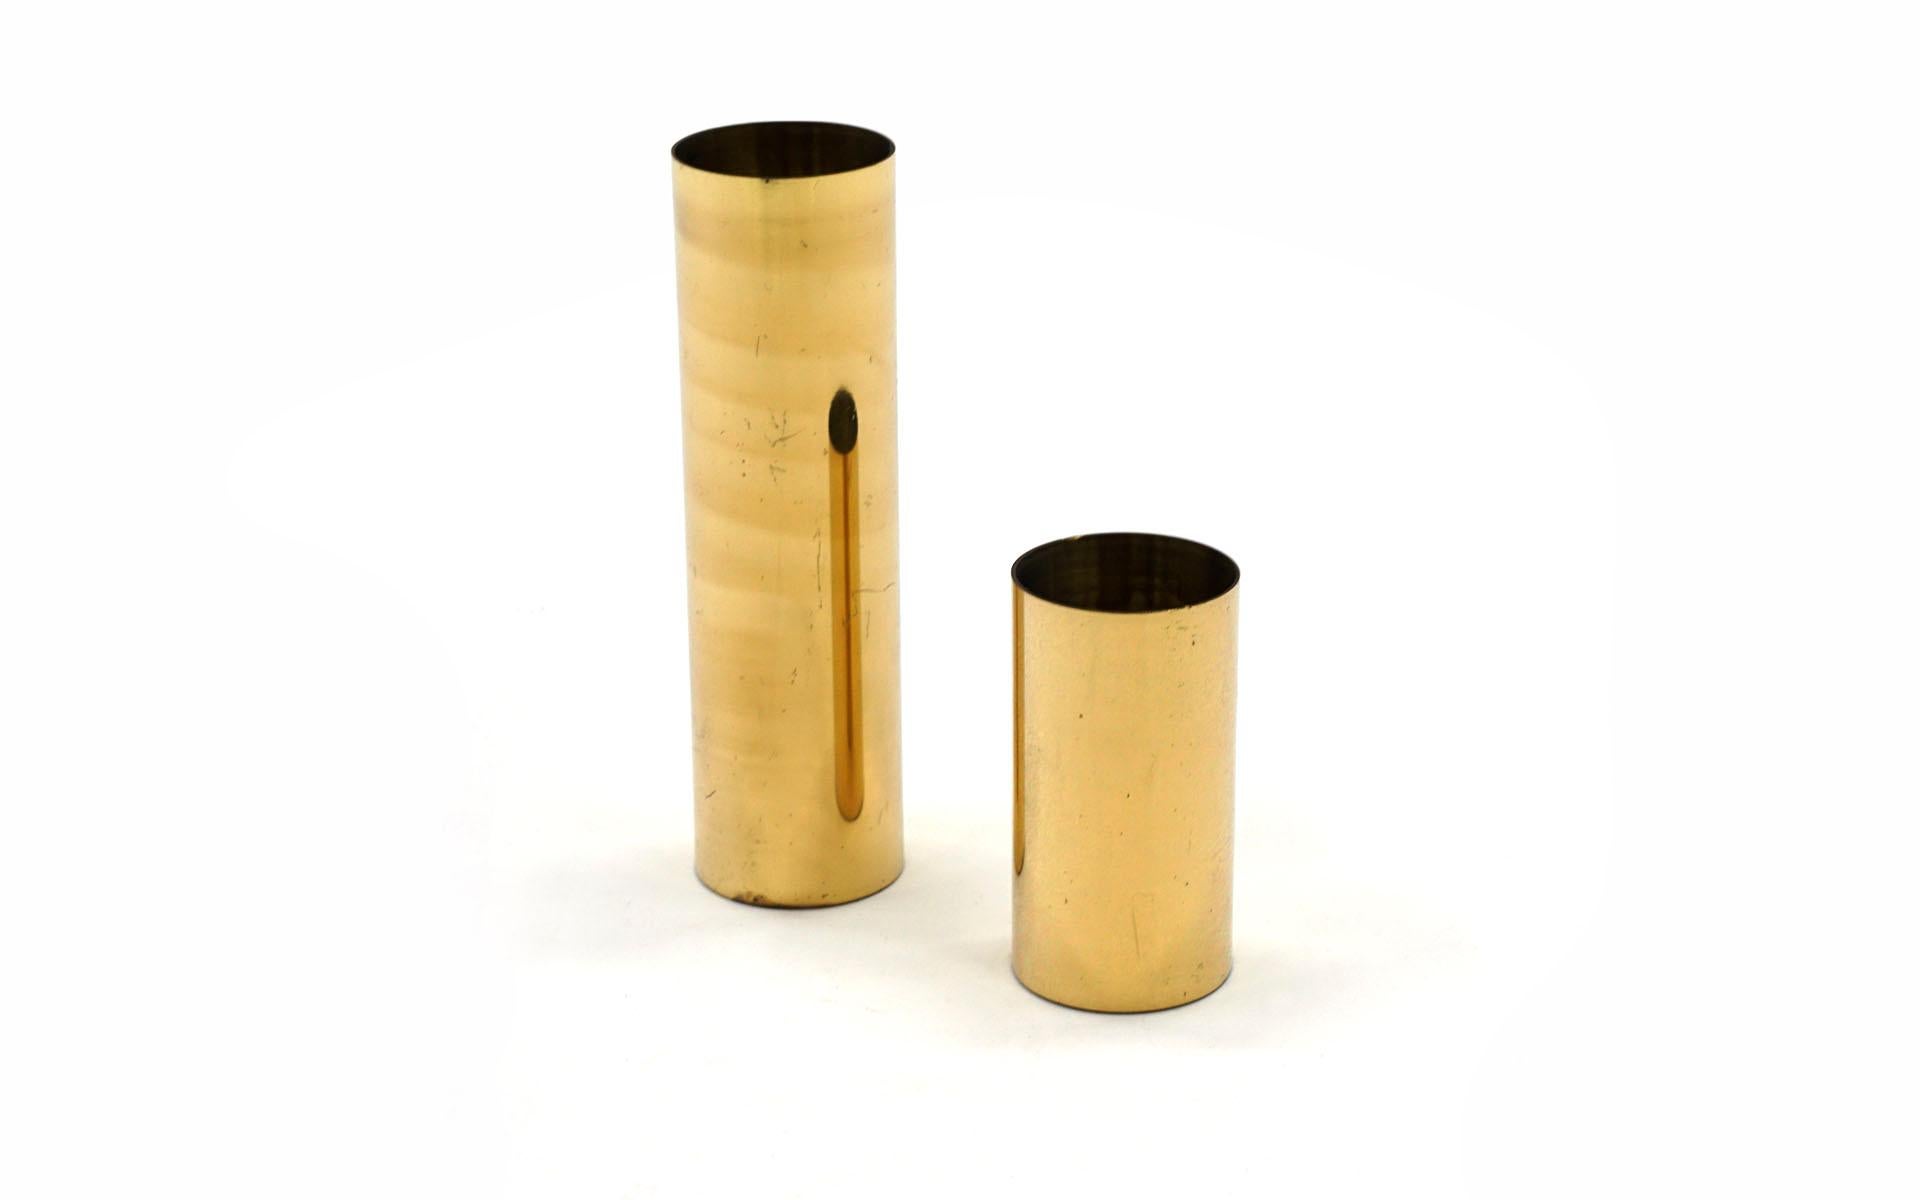 Complimenting pair of brass cylindrical candle holders in very good condition with nice patina.